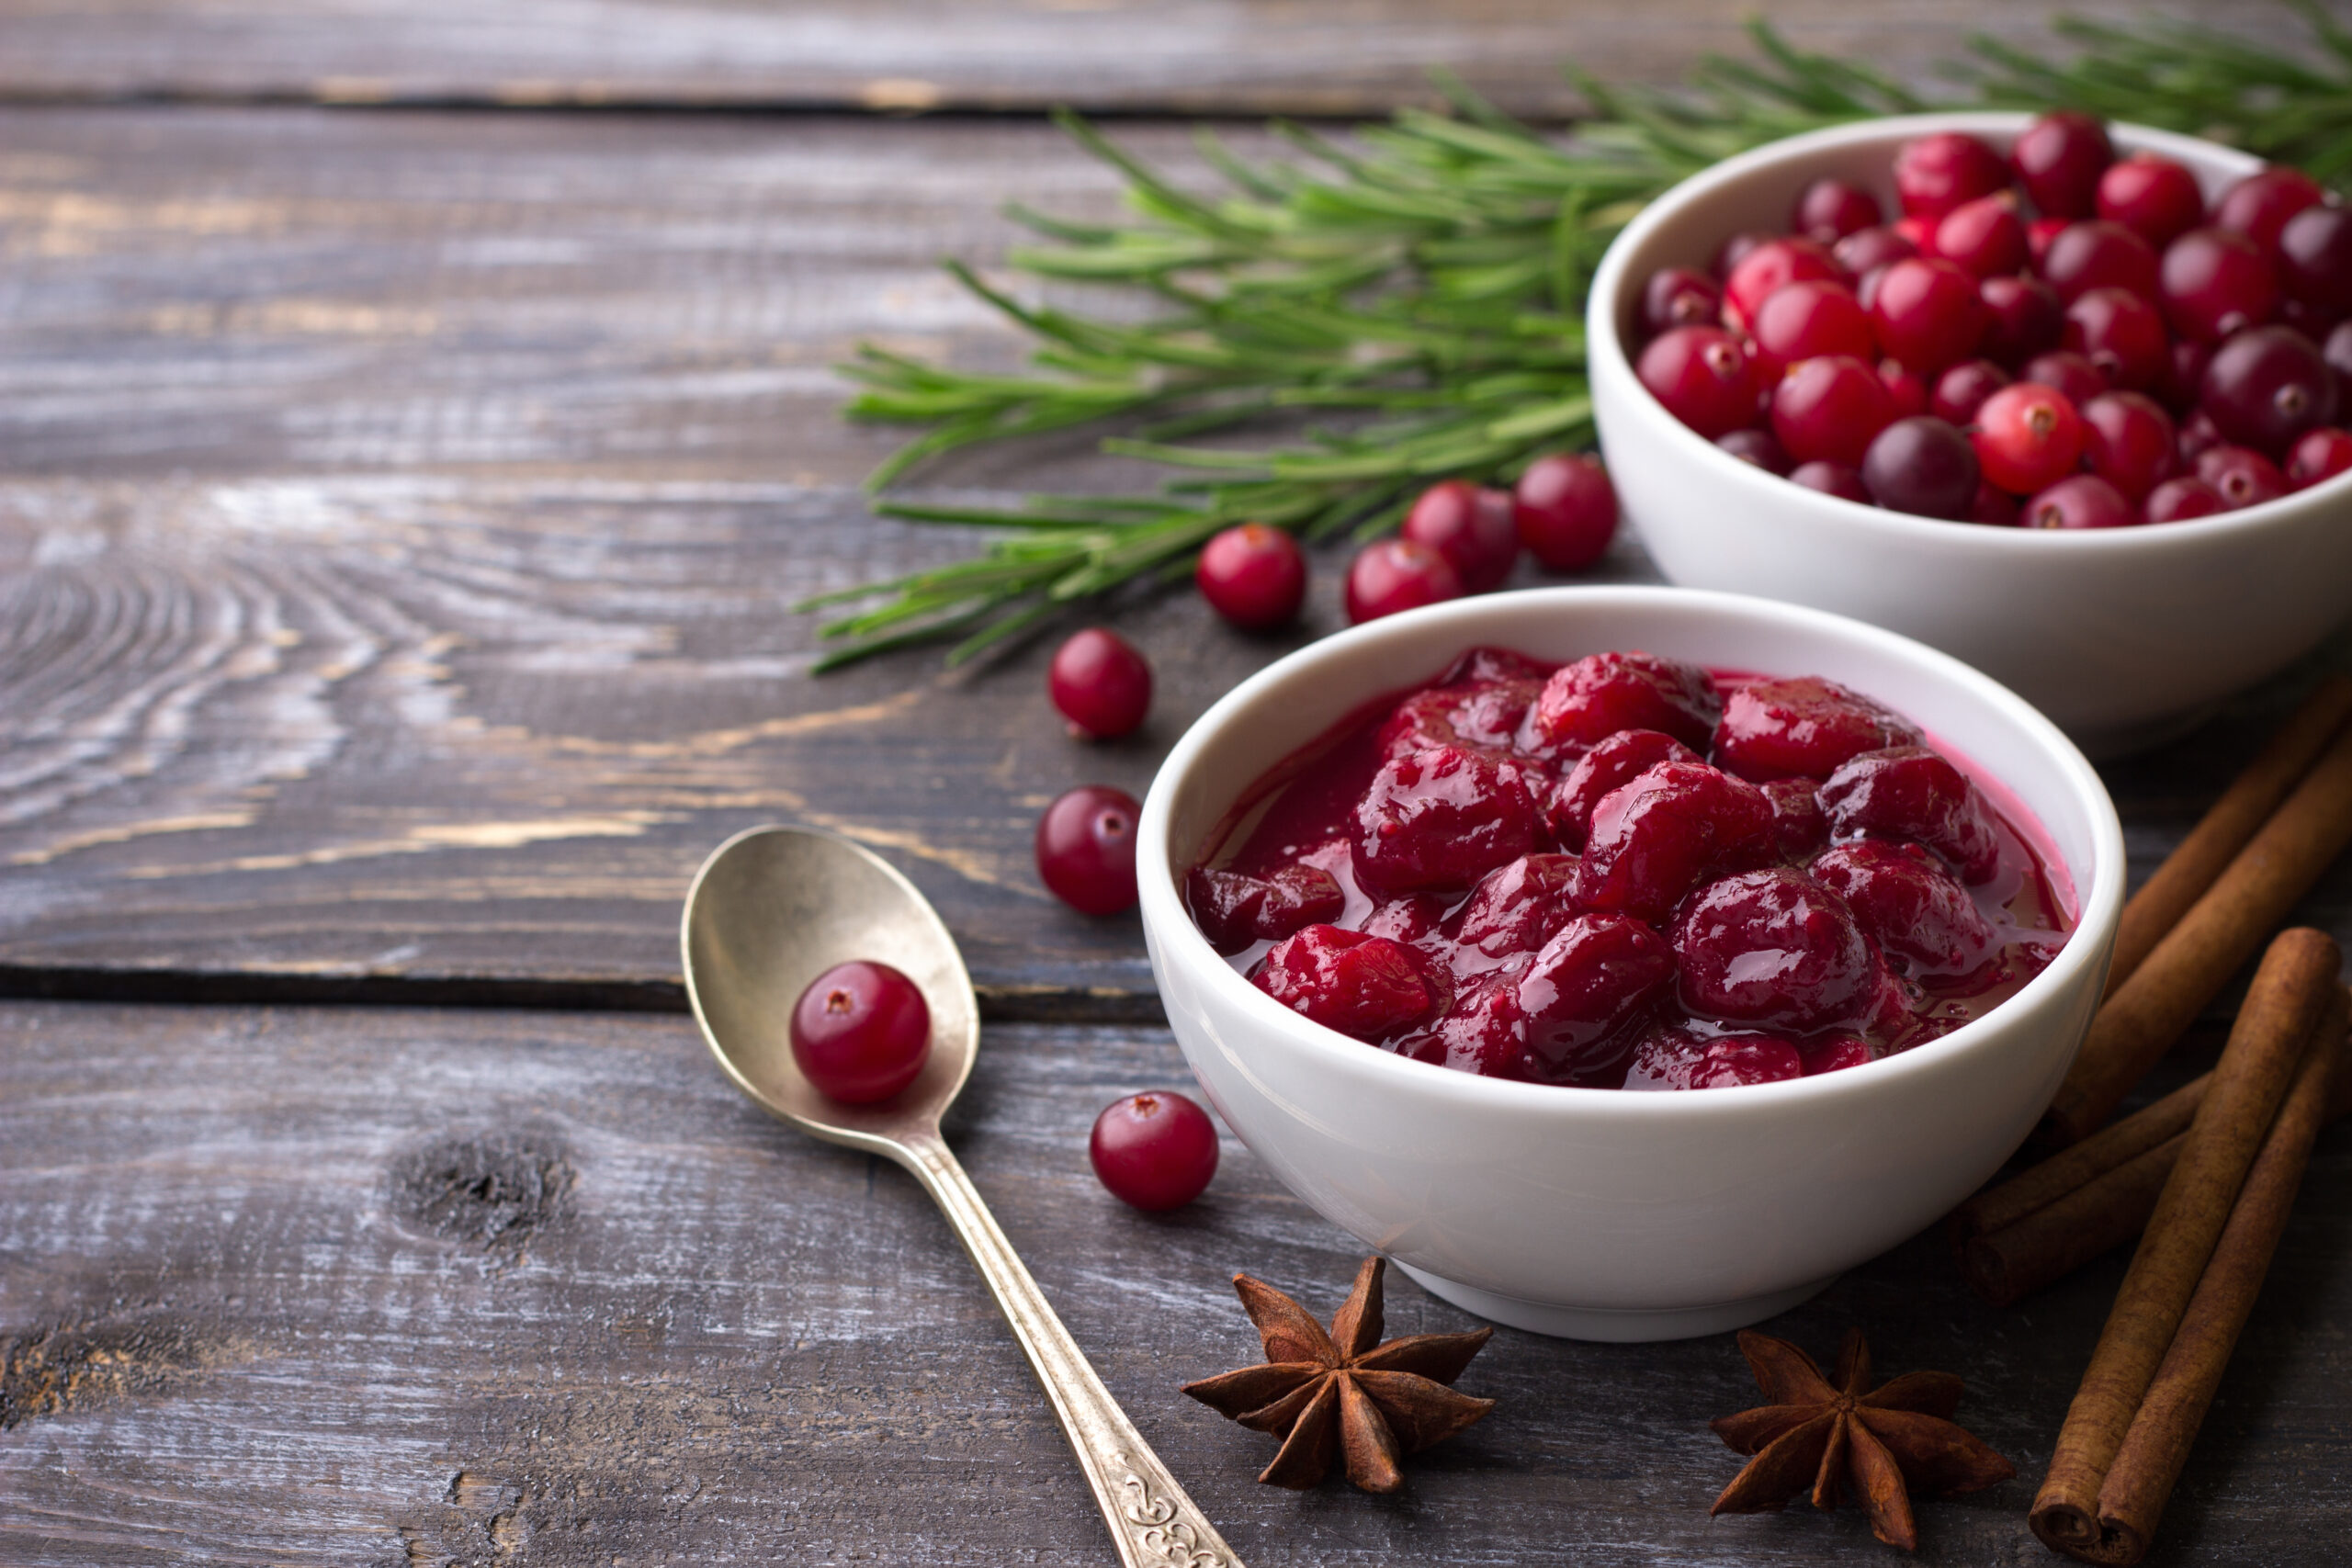 Make this easy homemade cranberry sauce in minutes. It tastes much better than the store-bought canned version. Healthier too! | www.grownupdish.com